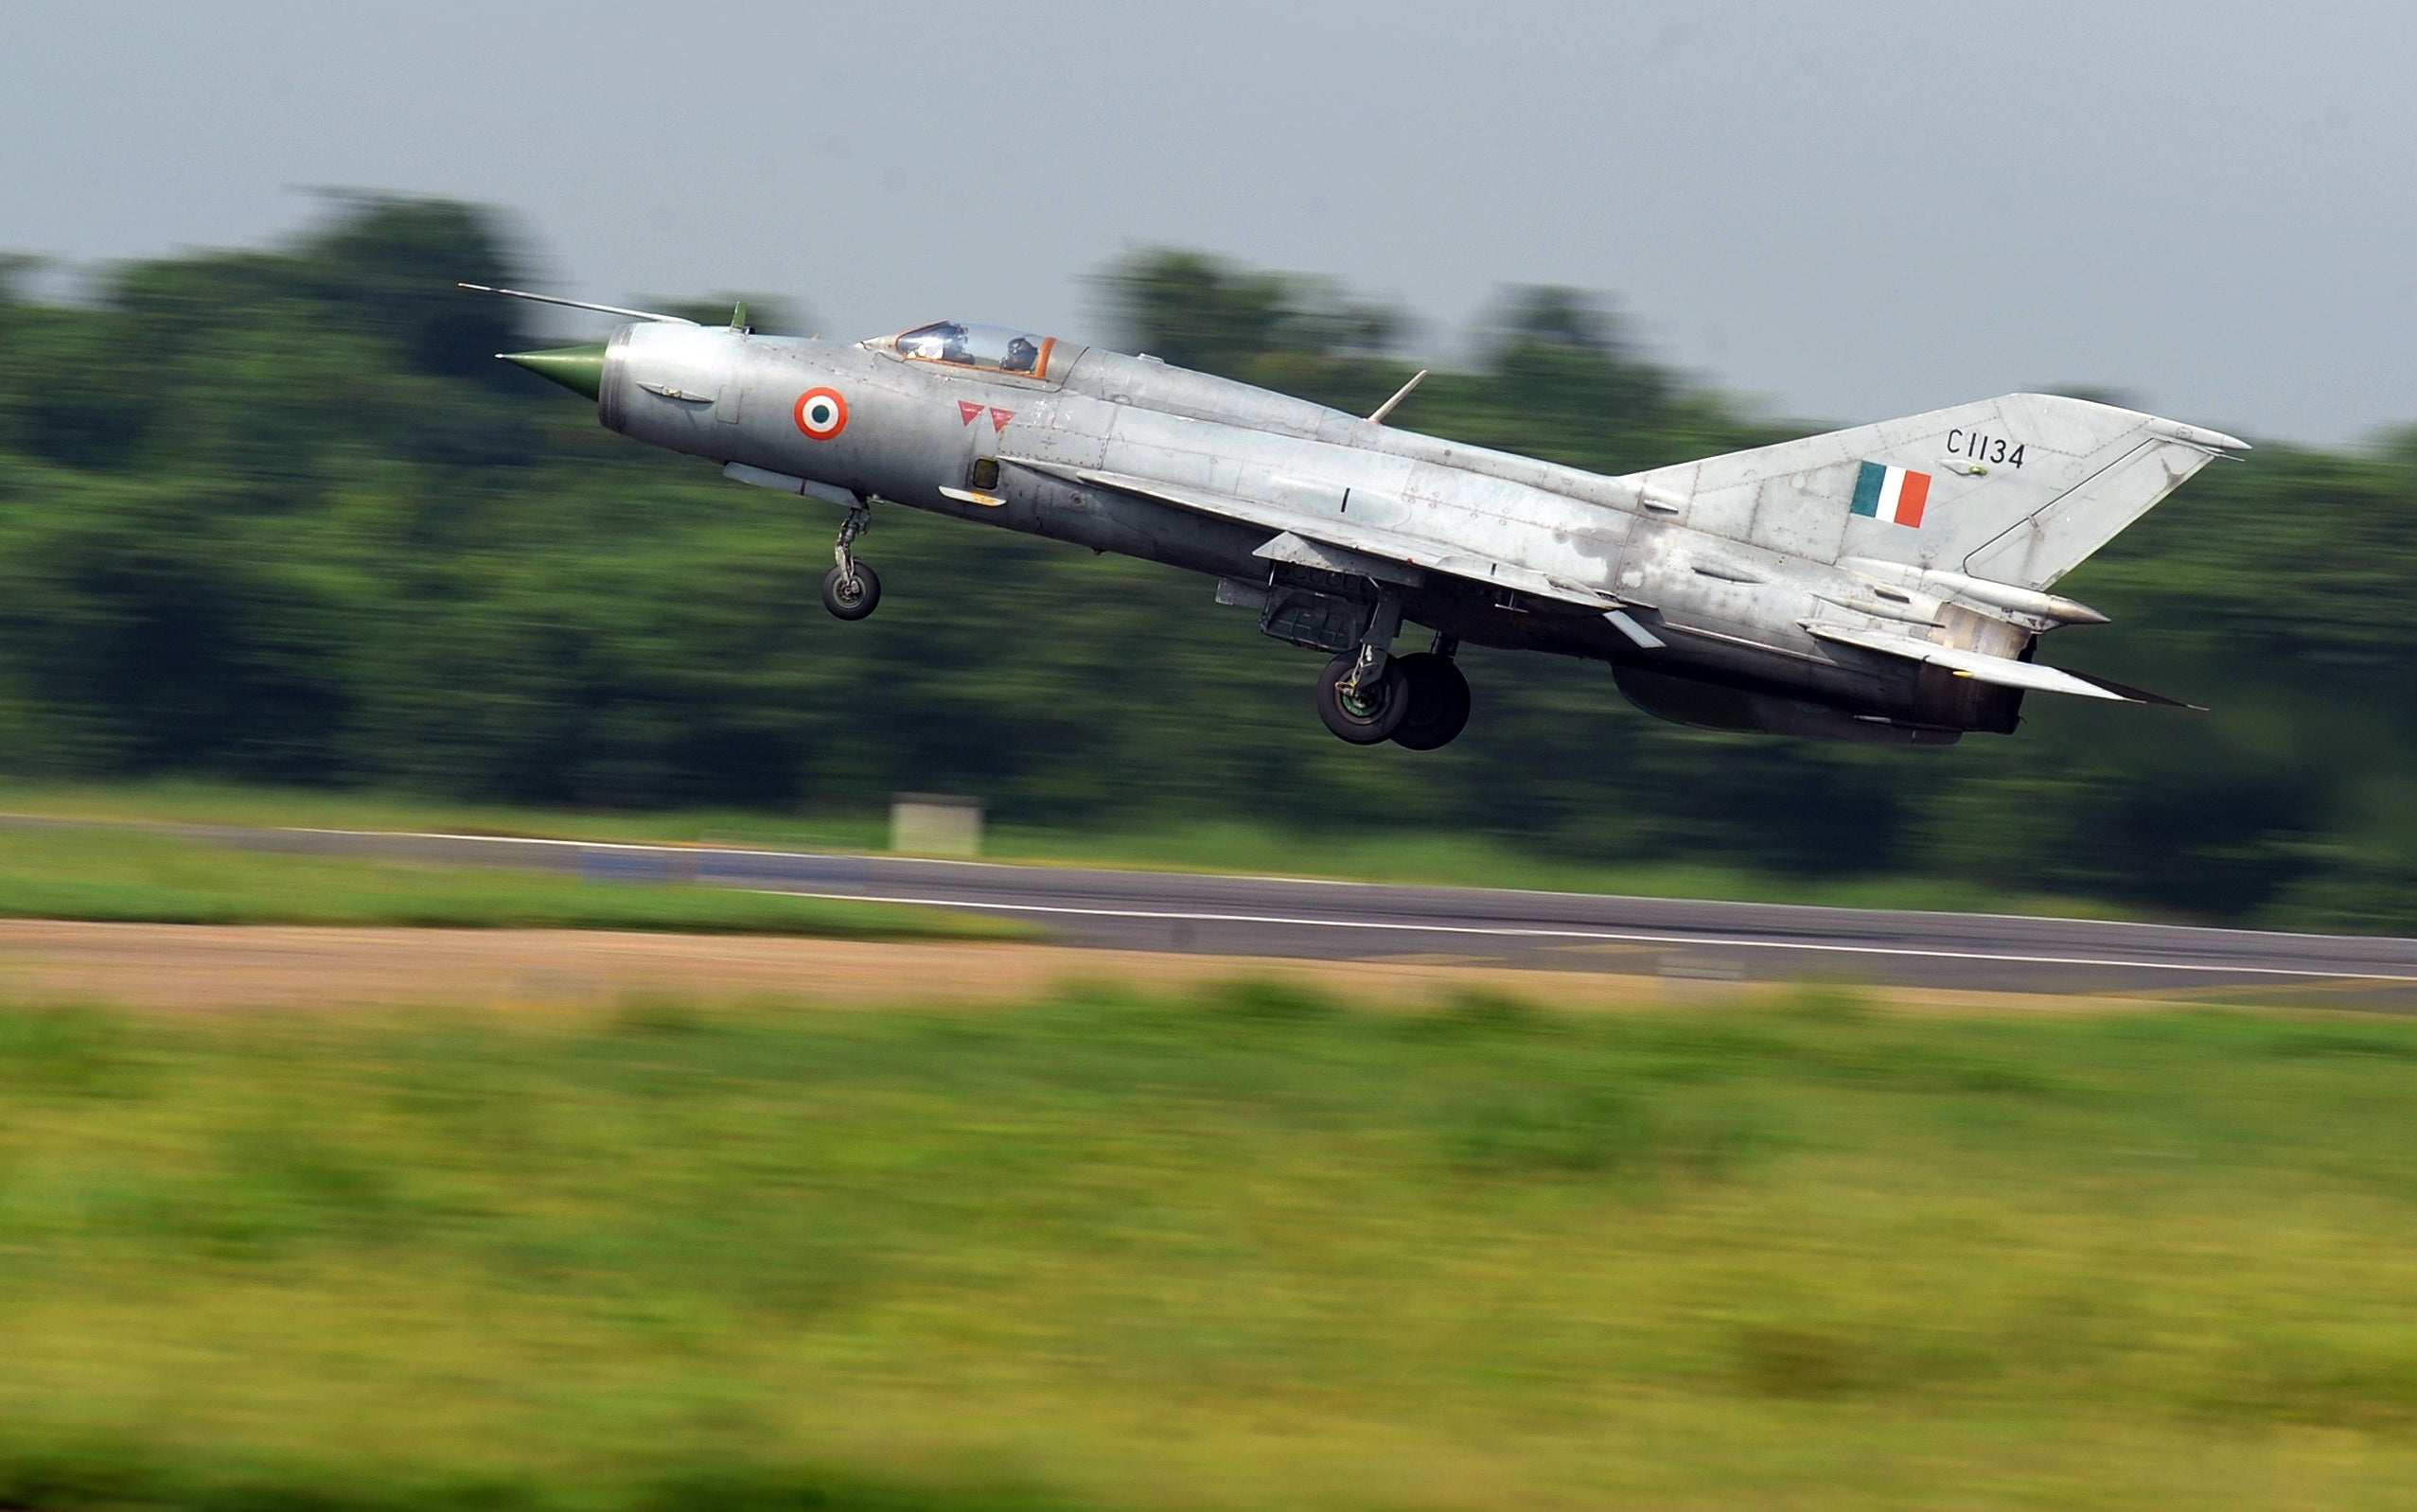 An Indian Air Force (IAF) MIG-21 takes off during a drill for Air Force Day celebrations in Kalikunda IAF airbase around 170 km west of Kolkata on September 29, 2011.  Indian Air Force Day is celebrated on October 8 each year. AFP PHOTO/ Dibyangshu SARKAR (Photo credit should read DIBYANGSHU SARKAR/AFP via Getty Images)